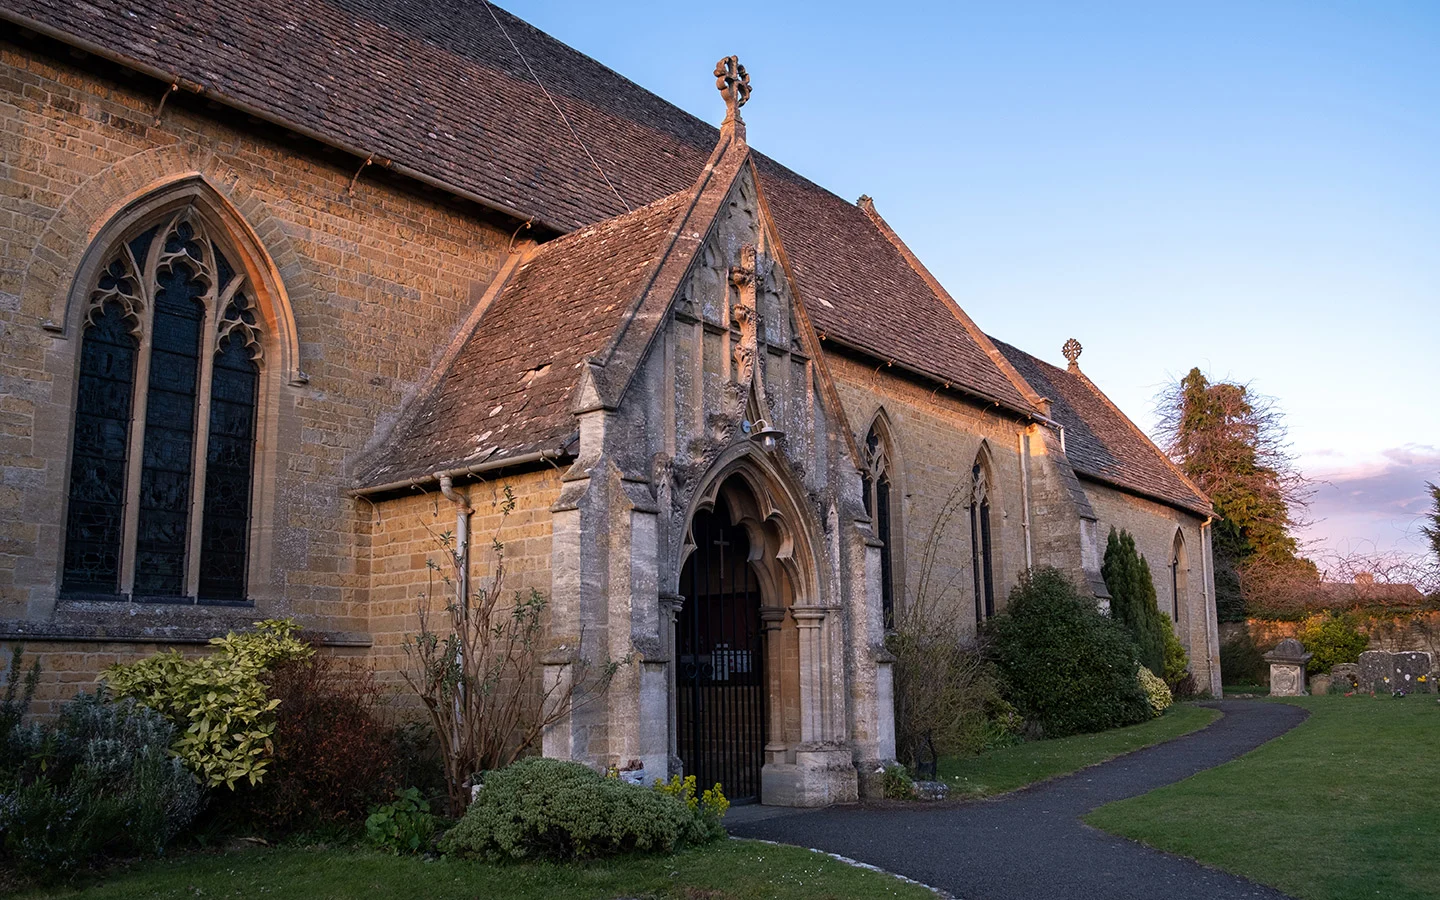 The Church of St Lawrence in Bourton-on-the-Water